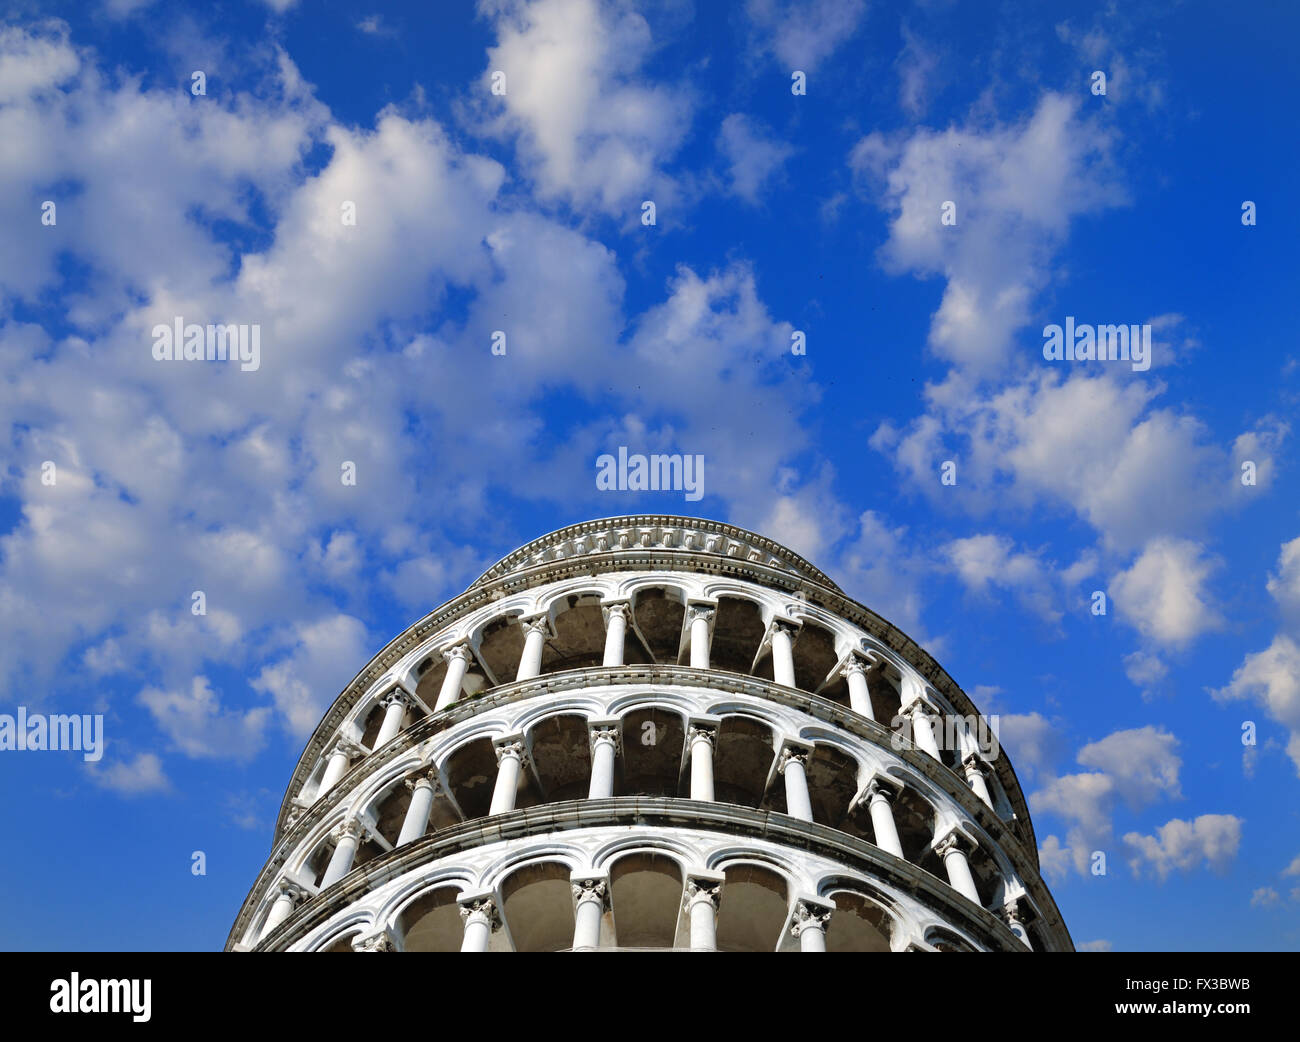 Bright blue summer sky and clouds over the Leaning Tower of Pisa, Italy Stock Photo